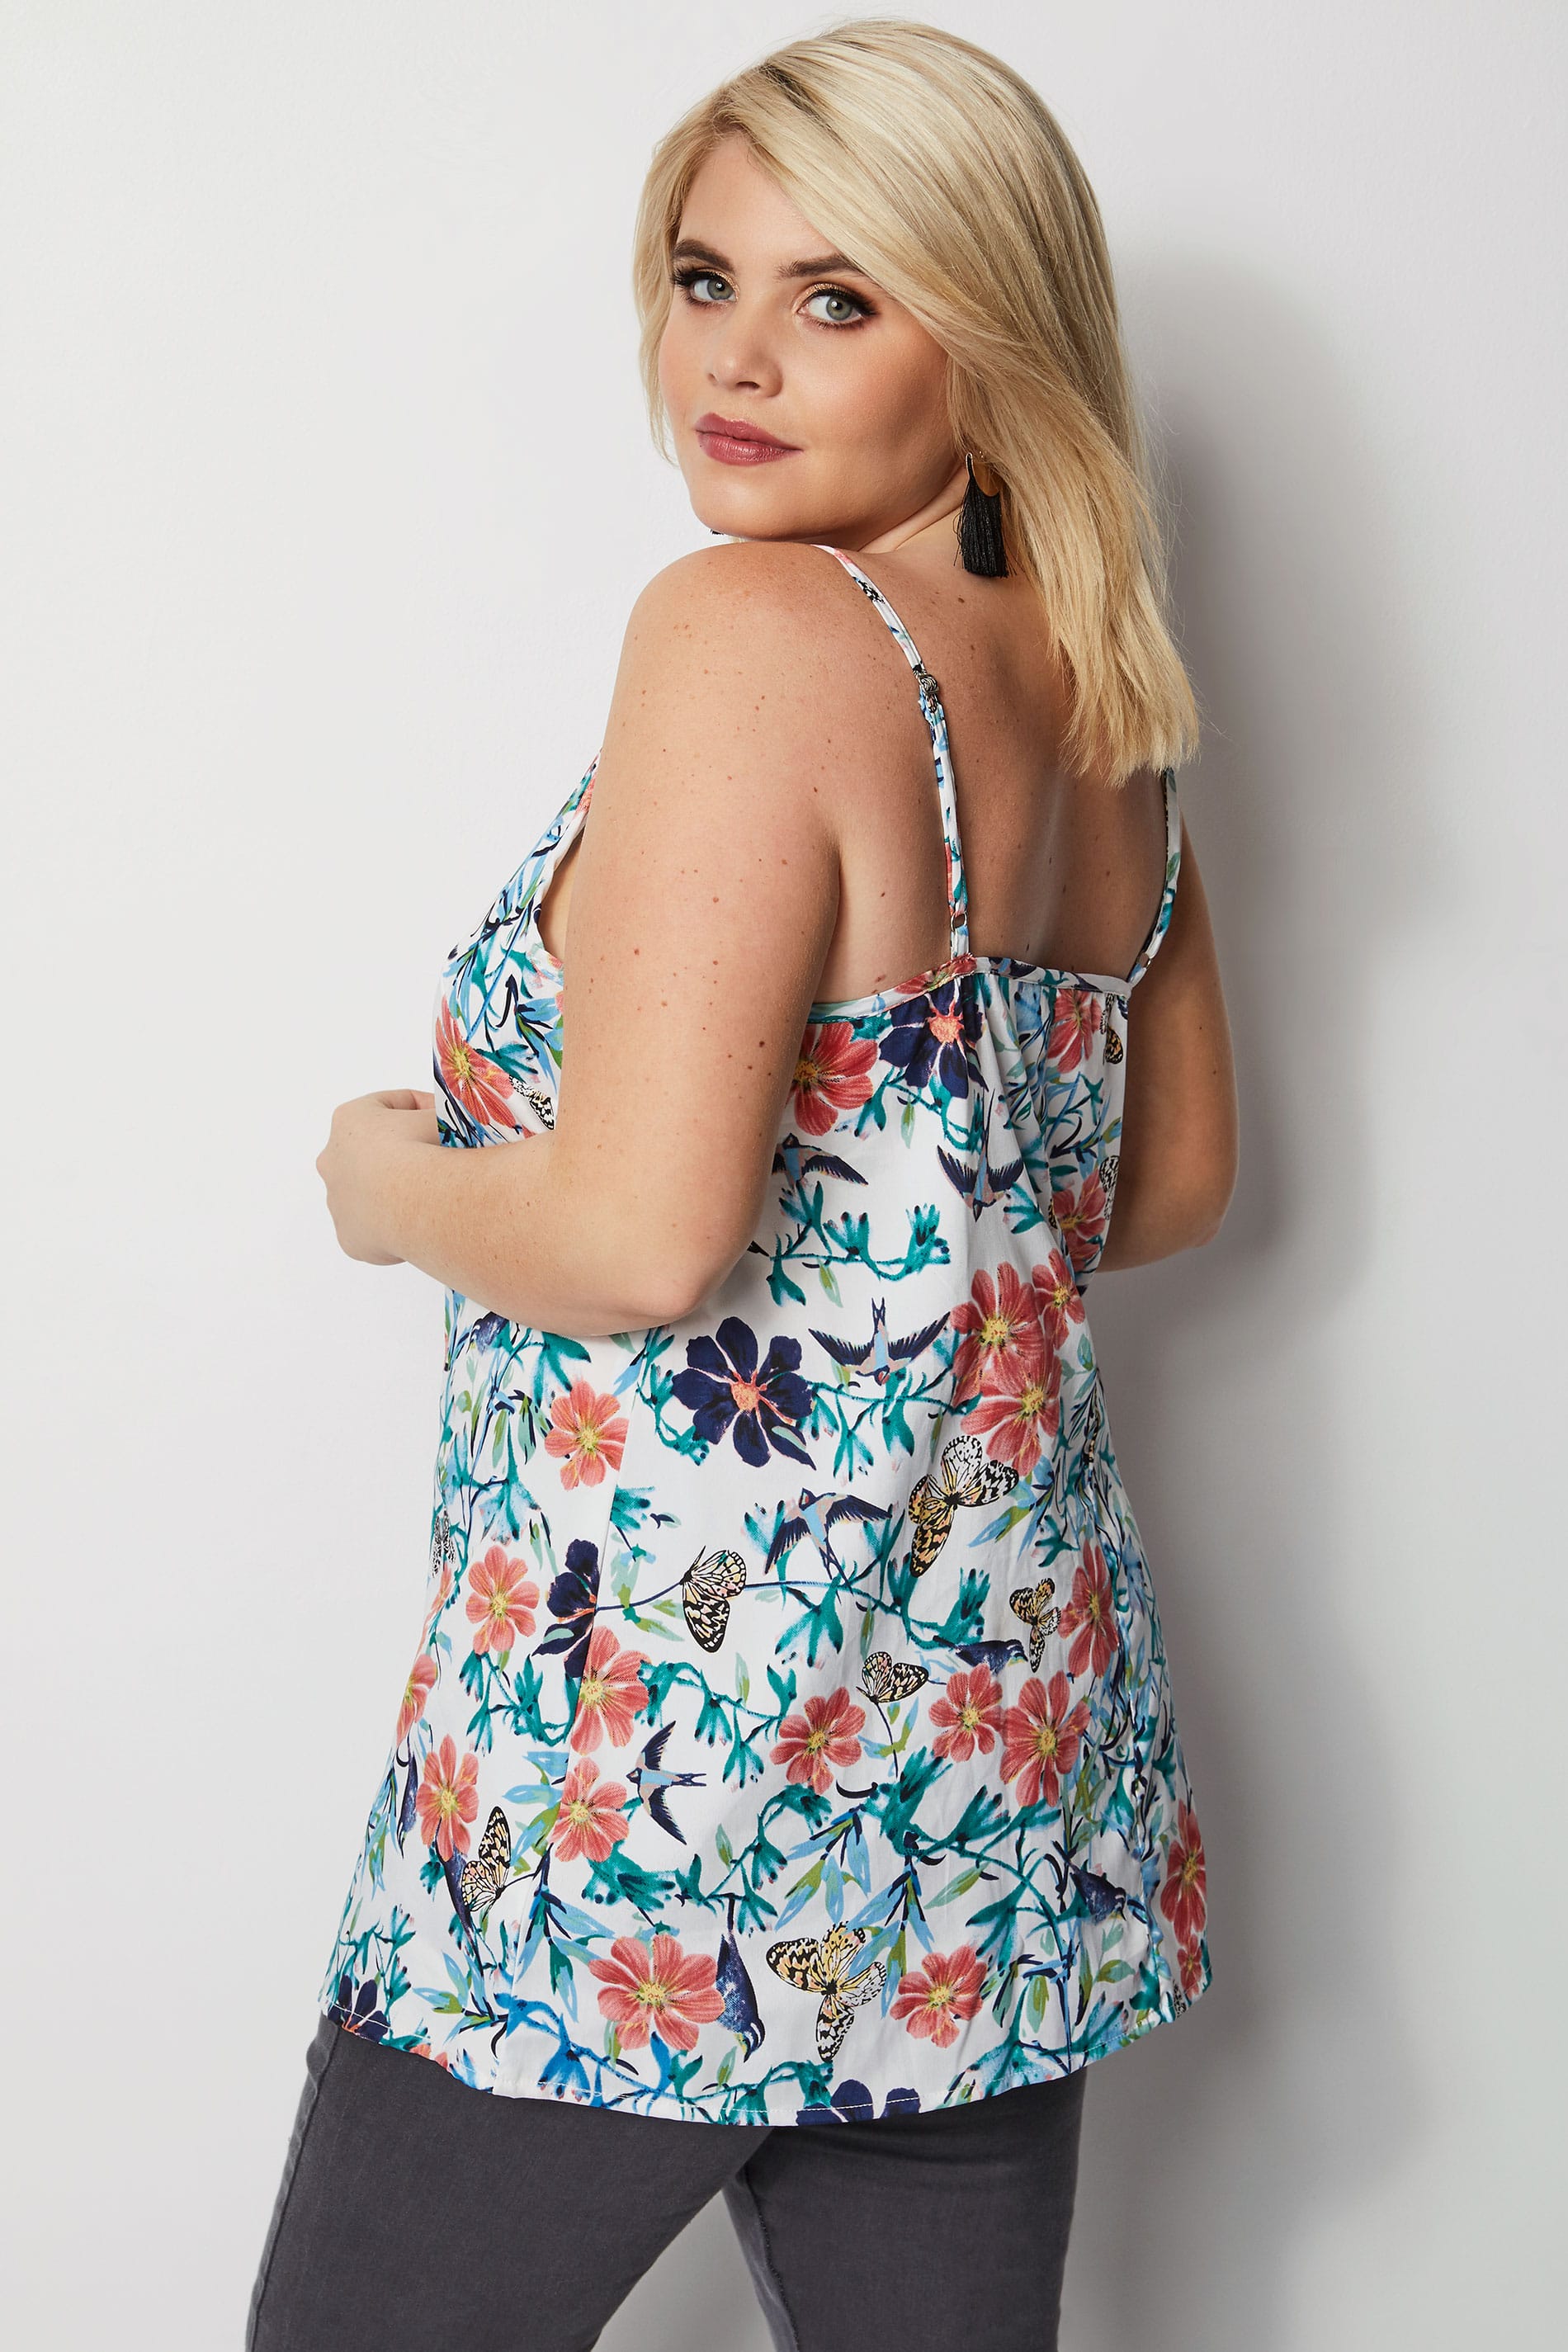 White Swallow & Butterfly Woven Cami Top, Plus size 20 to 28